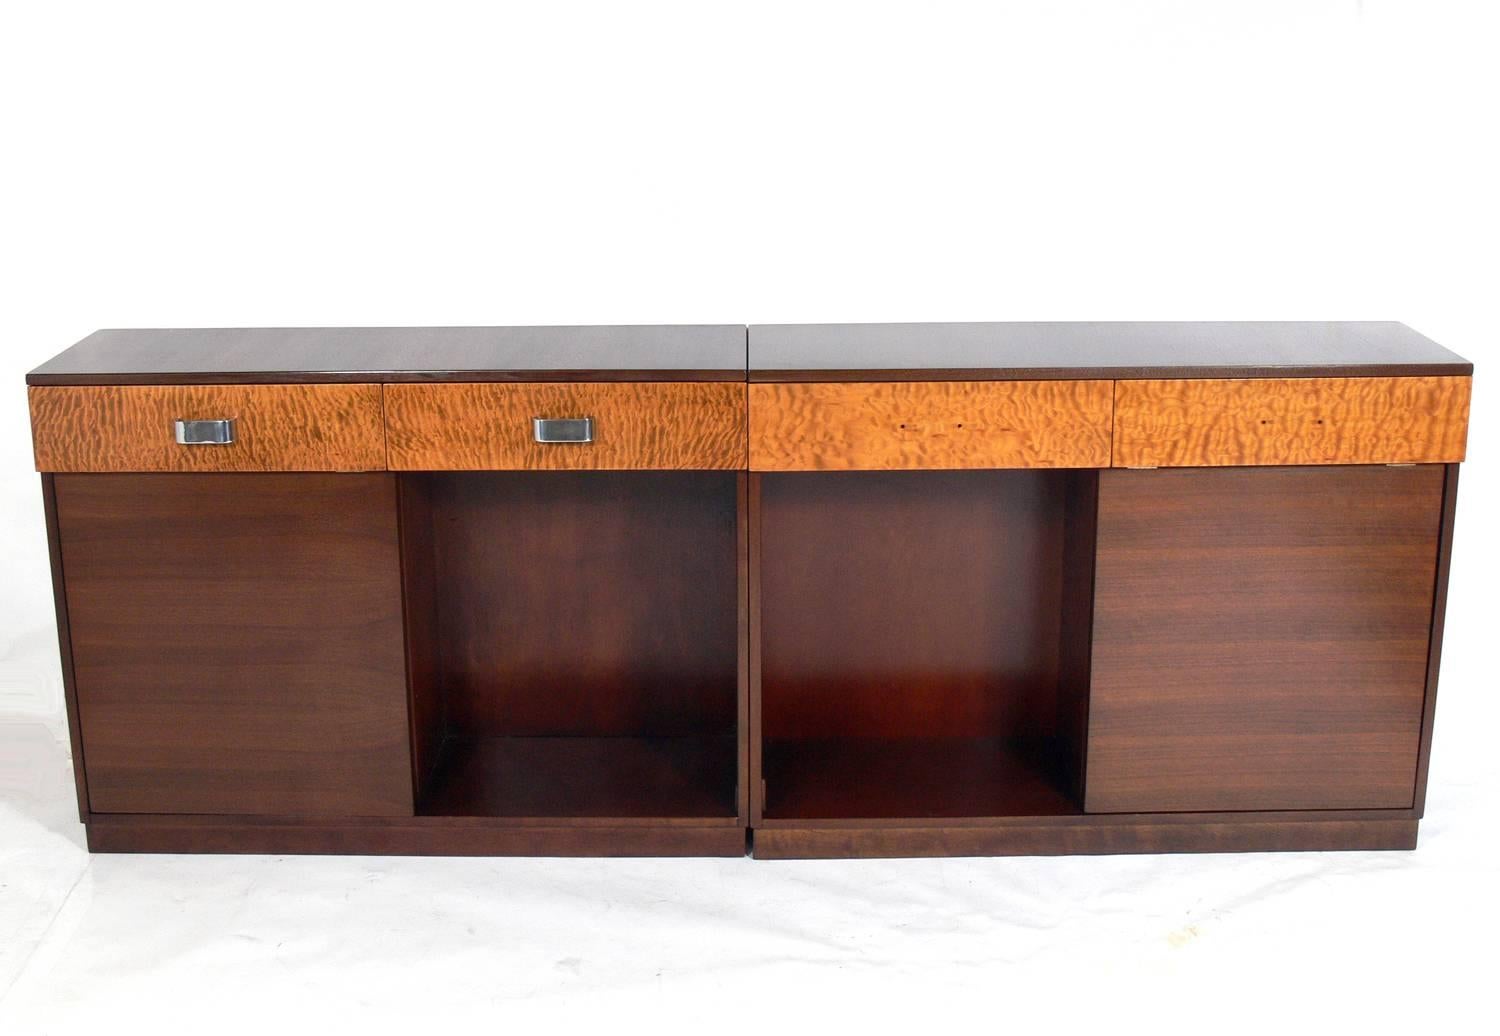 American Pair of Rare Art Deco Credenzas by Russel Wright for Heywood Wakefield For Sale